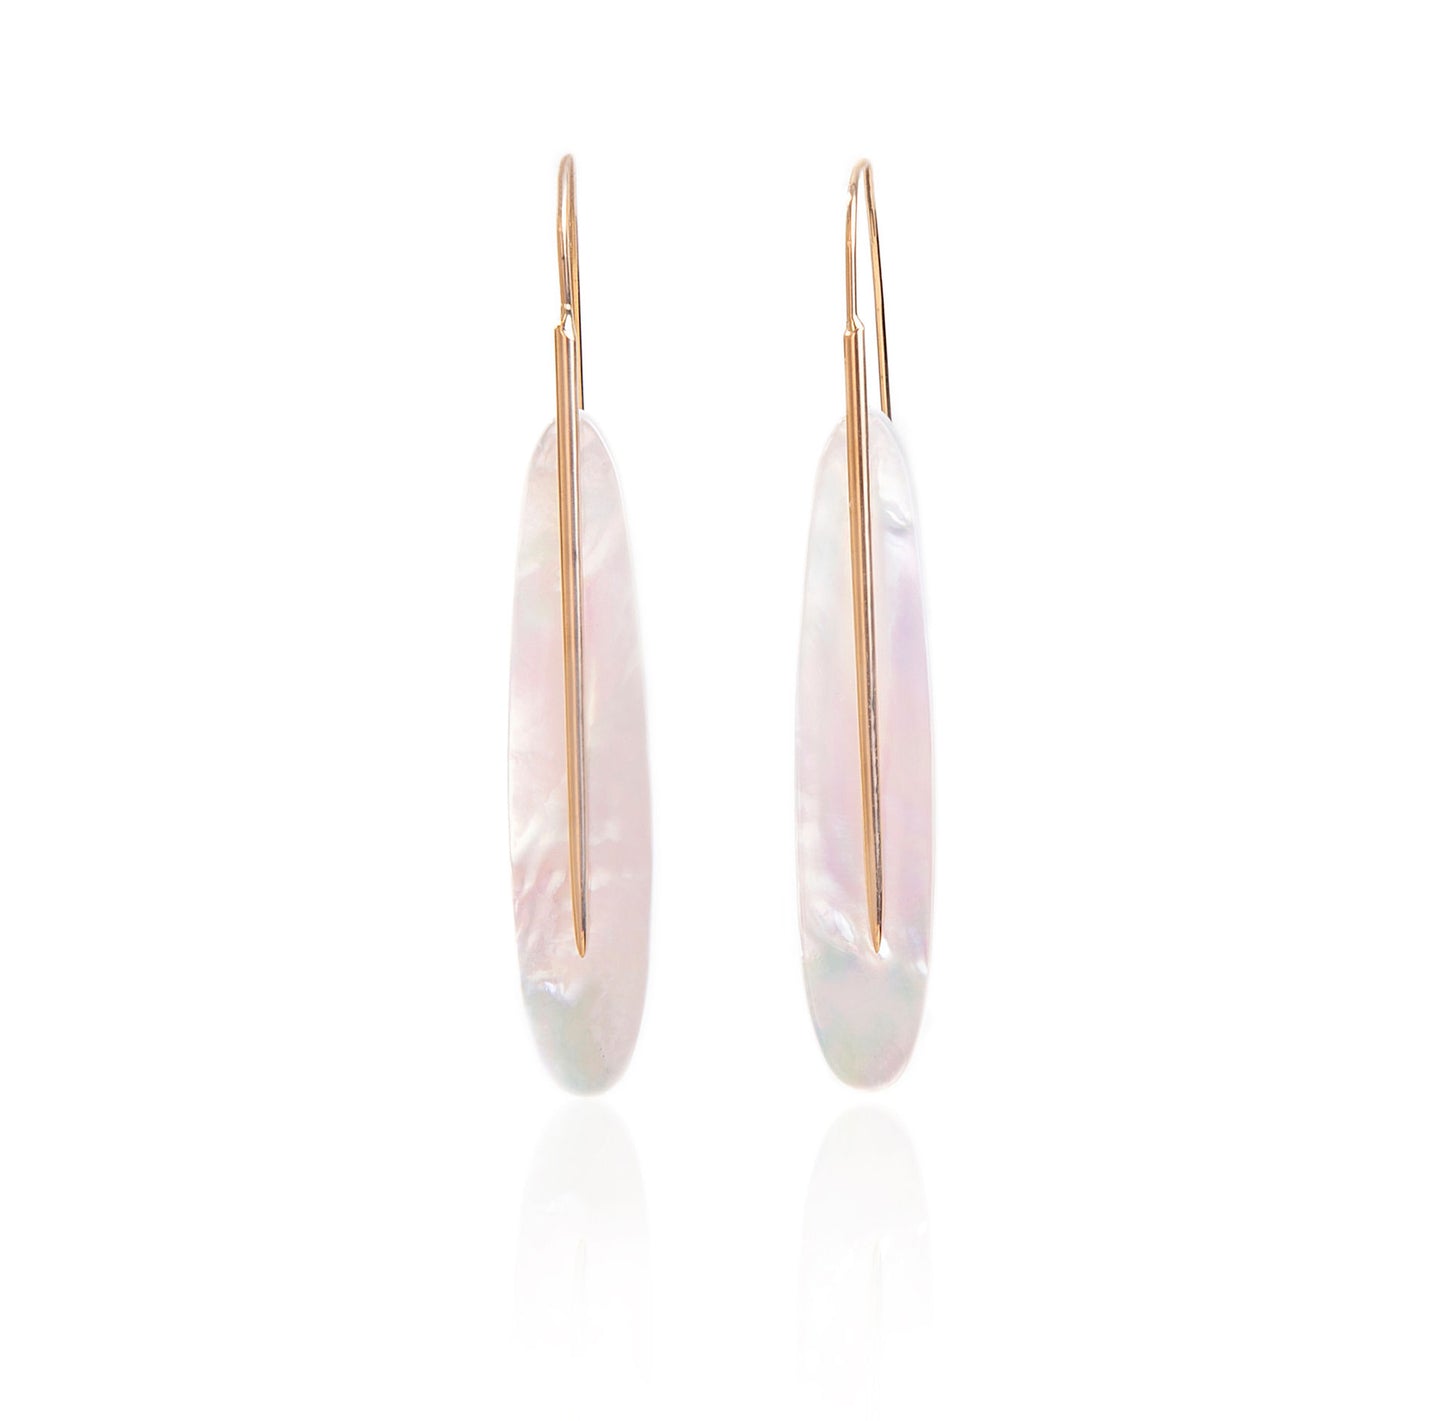 Large Feather Earrings in 18k Gold and White Mother of Pearl